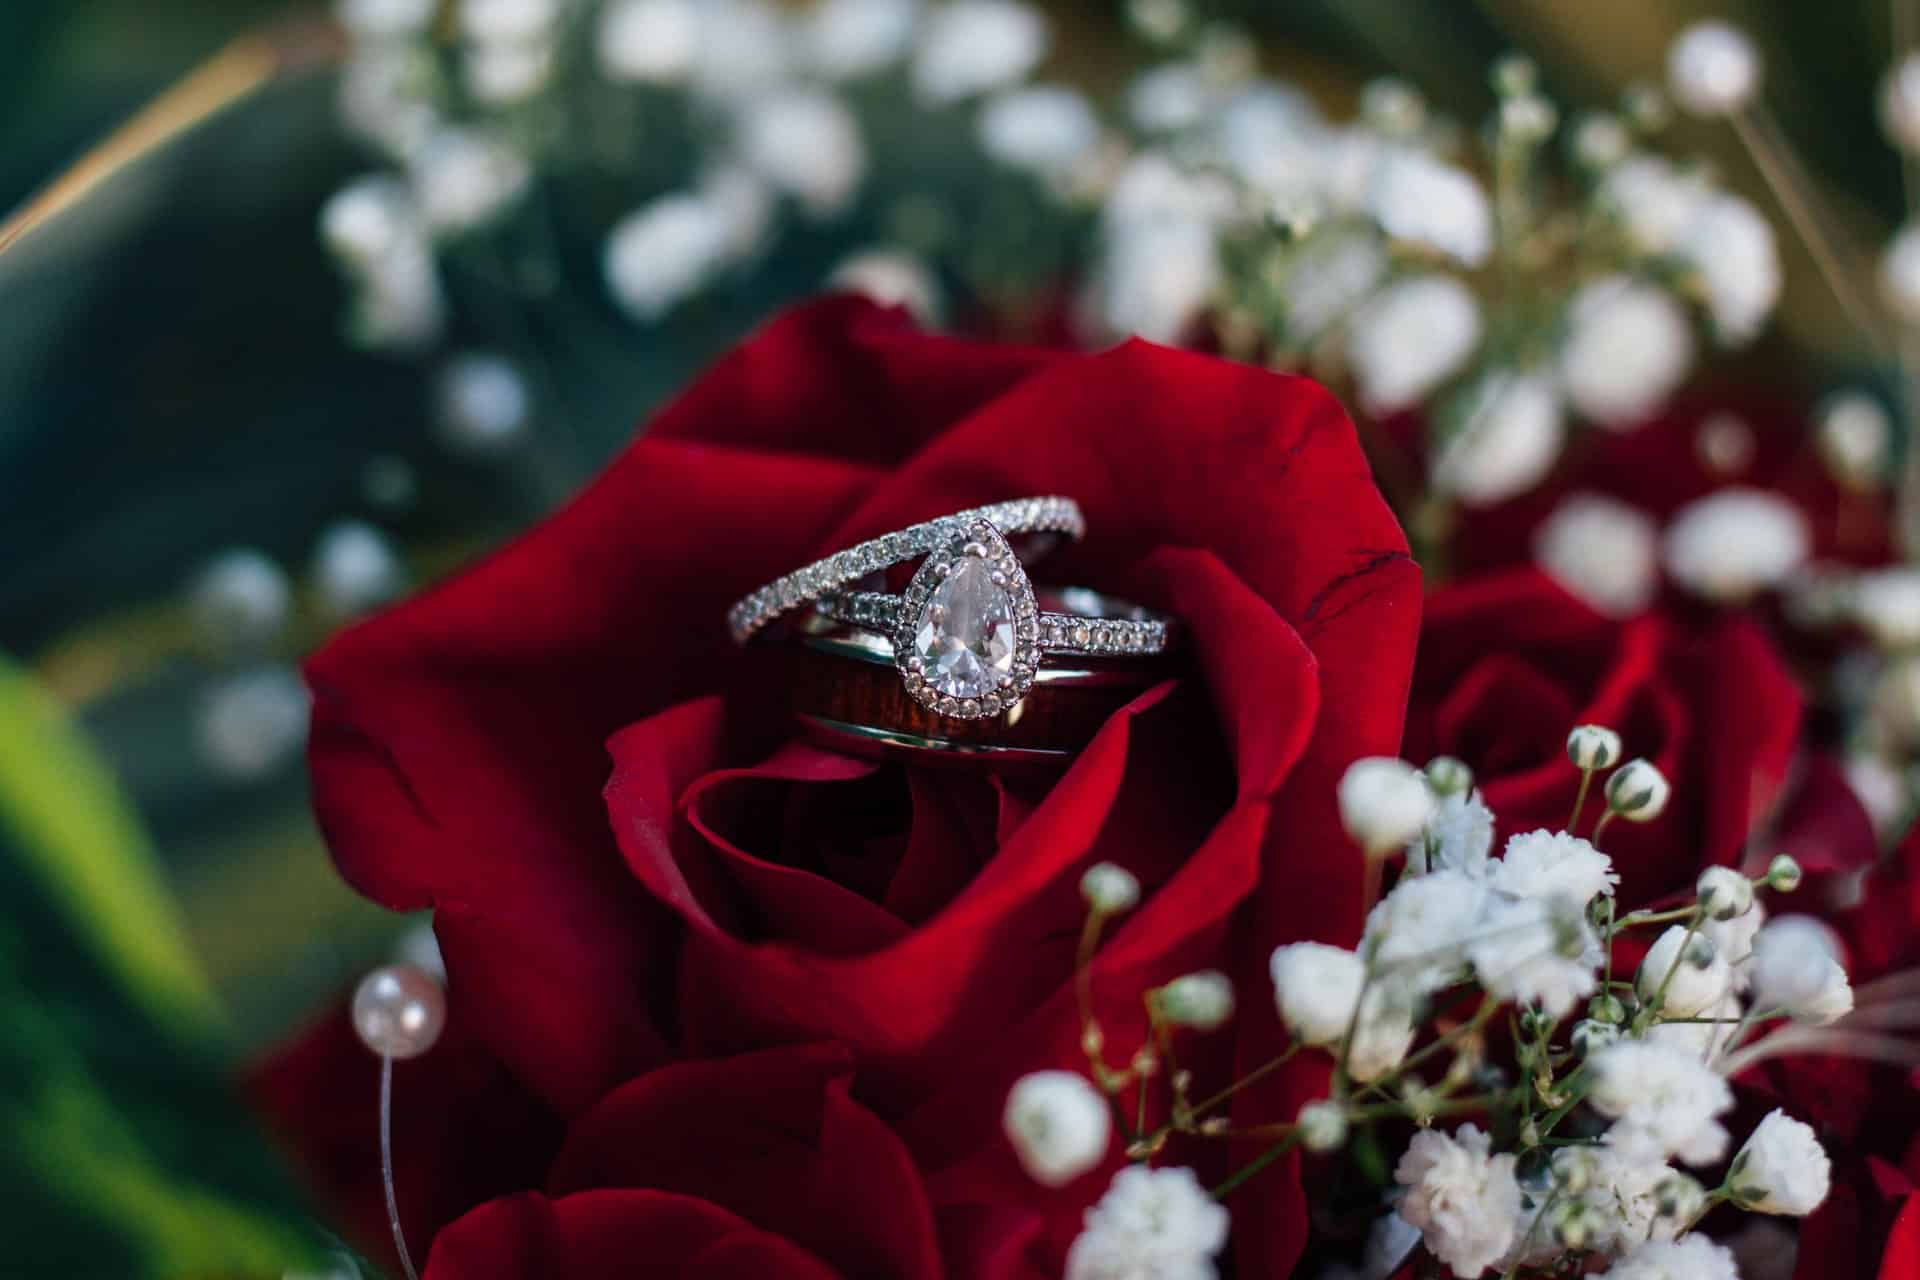 engagement ring and wedding ring placed in red rose